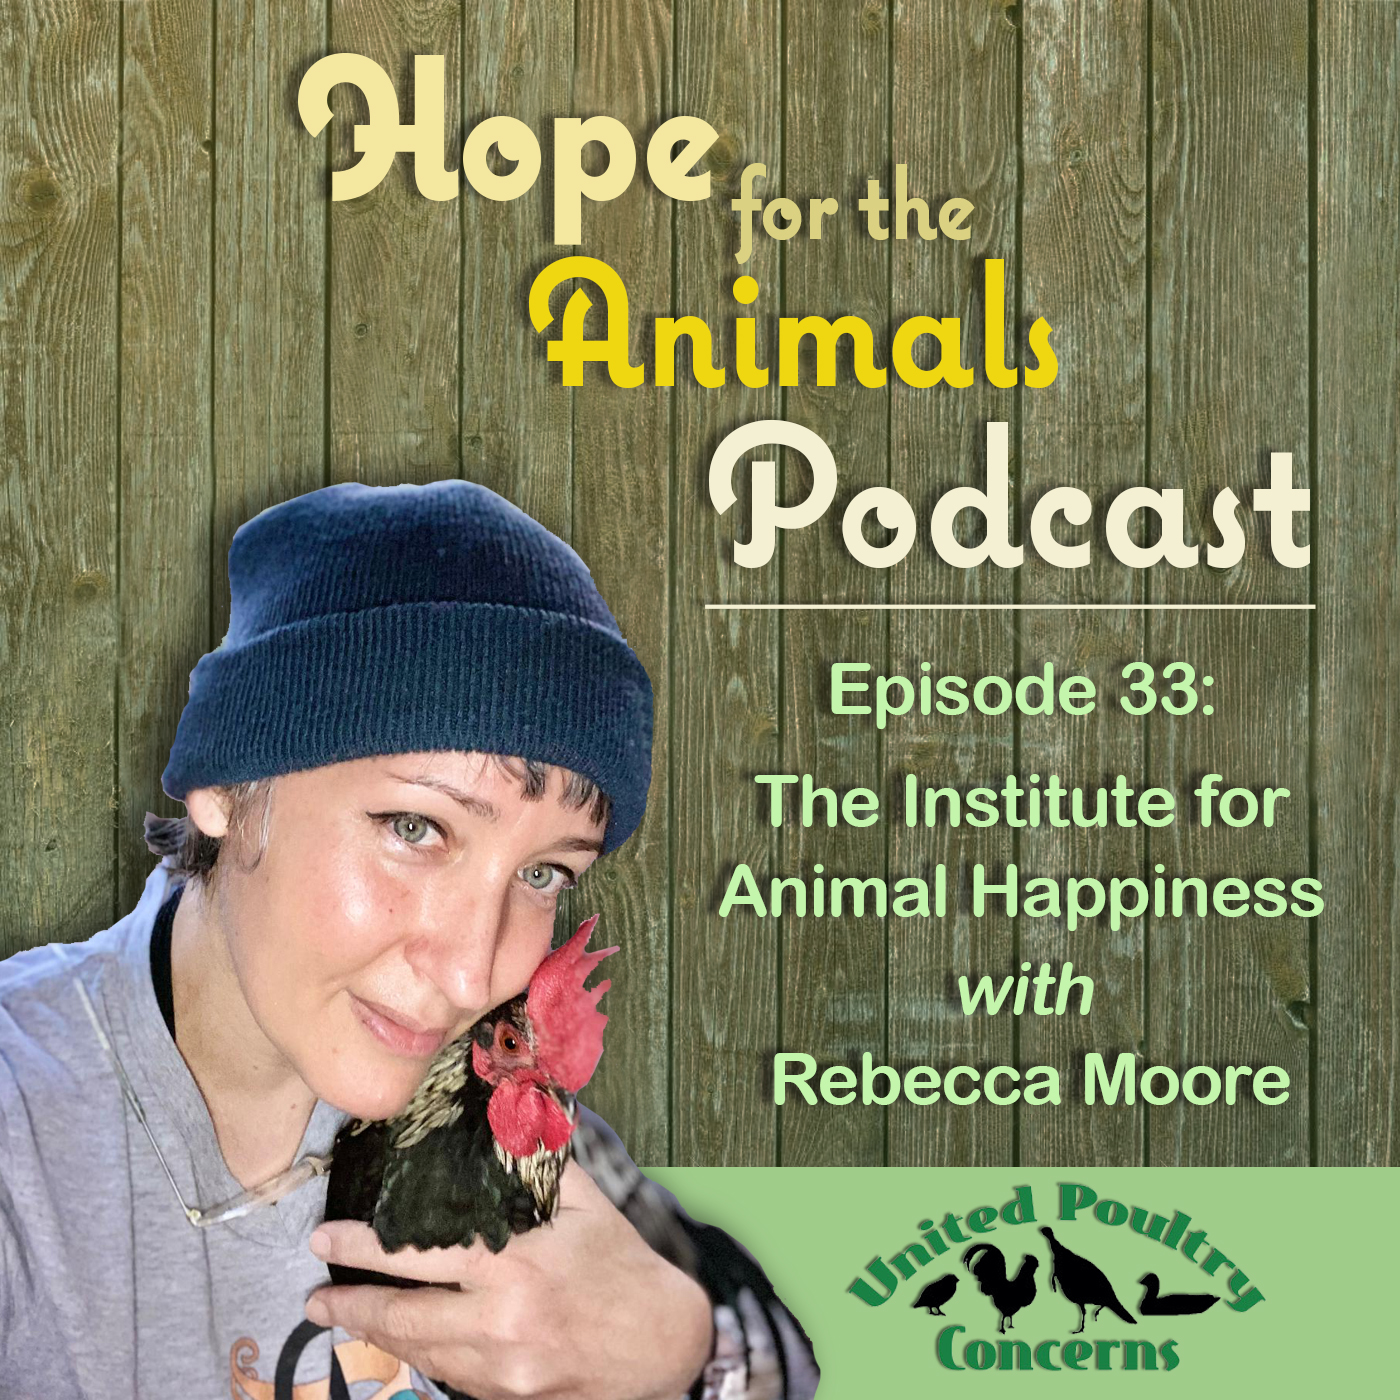 Episode 33: The Institute for Animal Happiness with Rebecca Moore